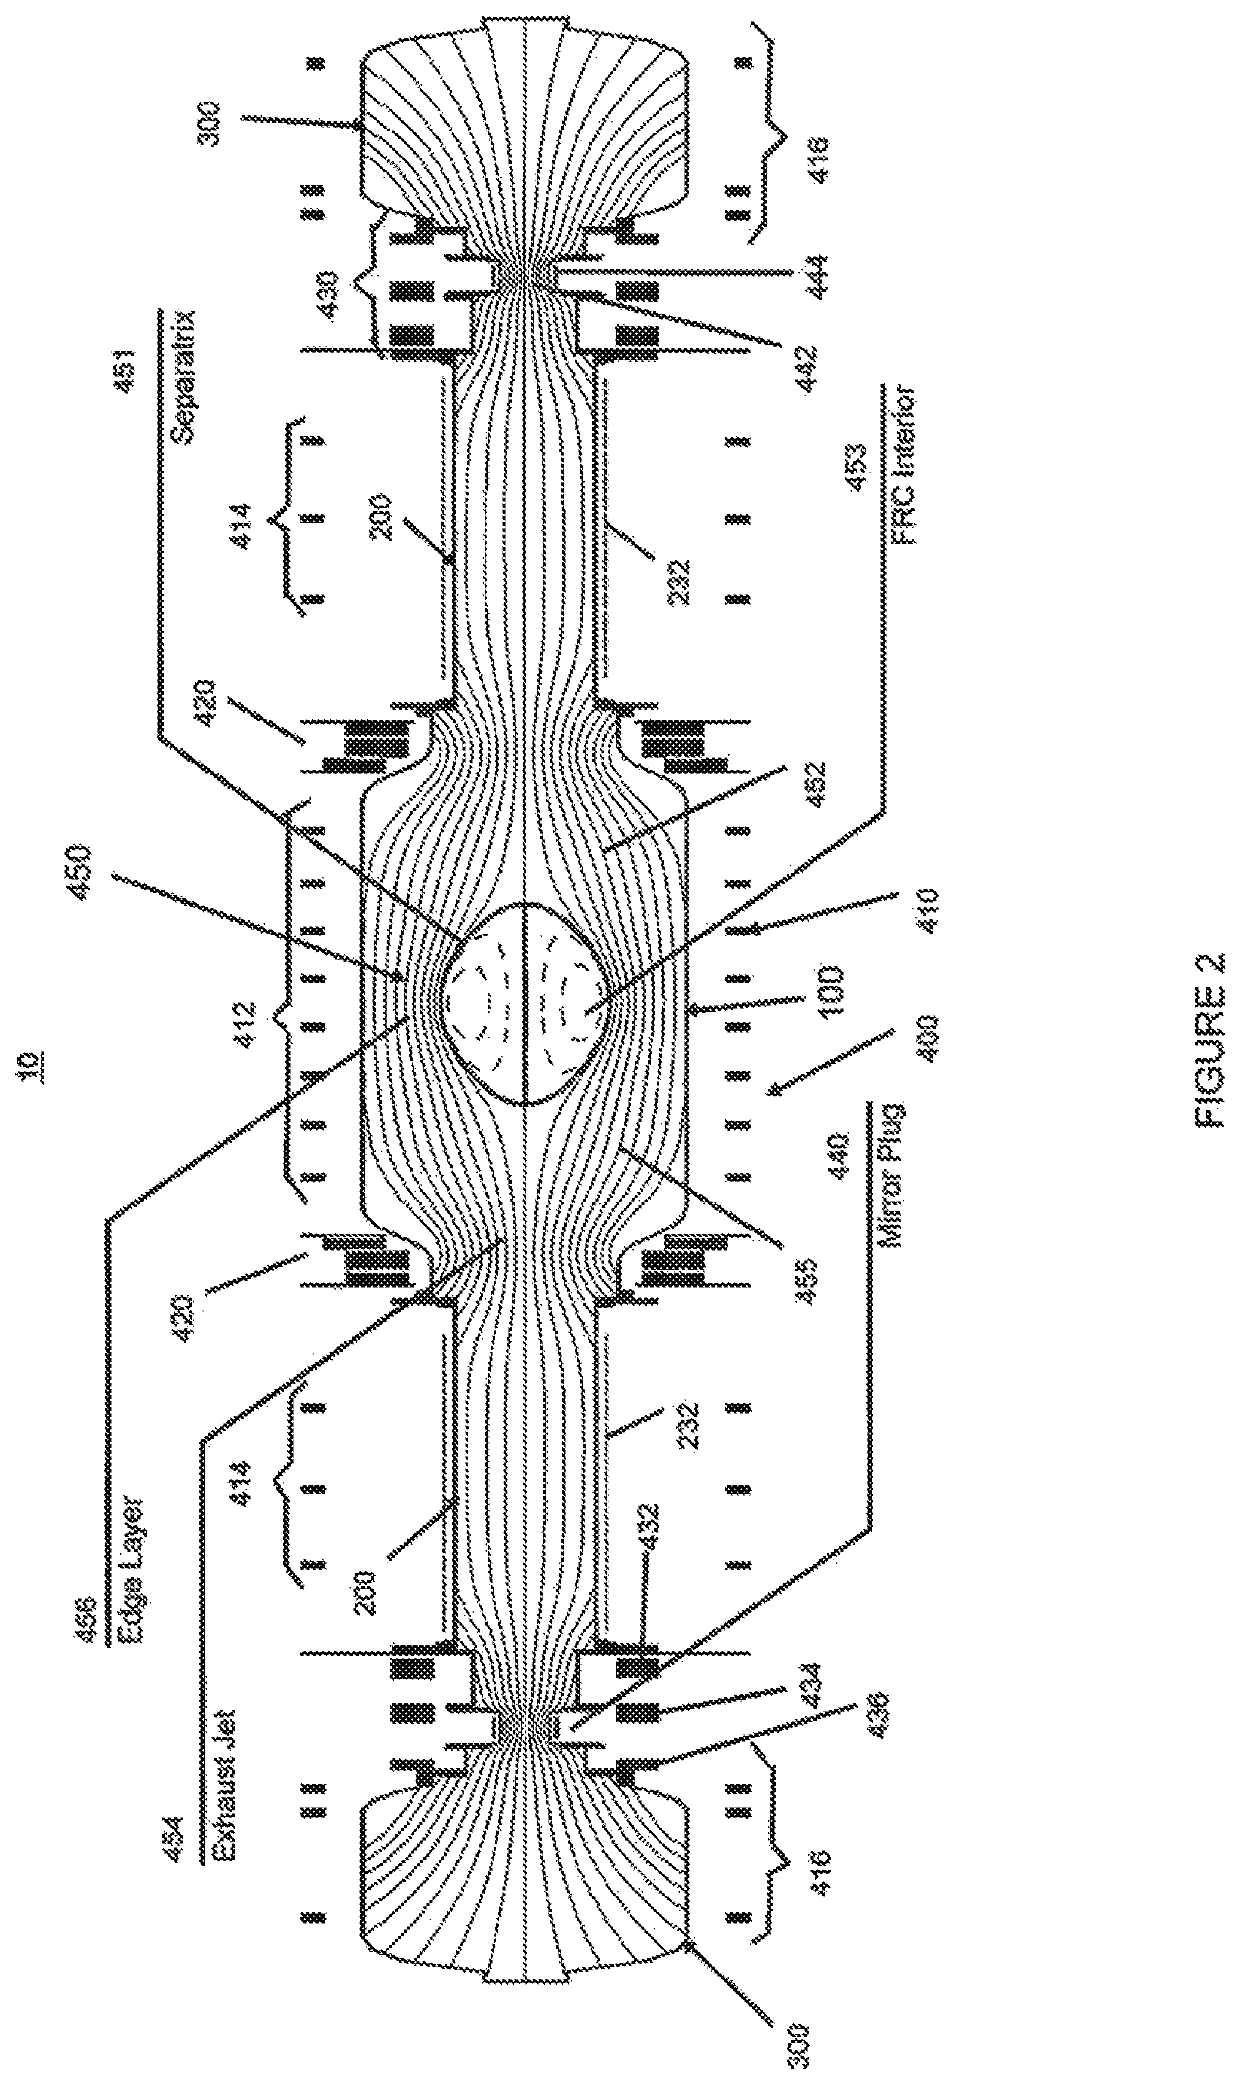 Systems and methods for improved sustainment of a high performance FRC plasma at elevated energies utilizing neutral beam injectors with tunable beam energies